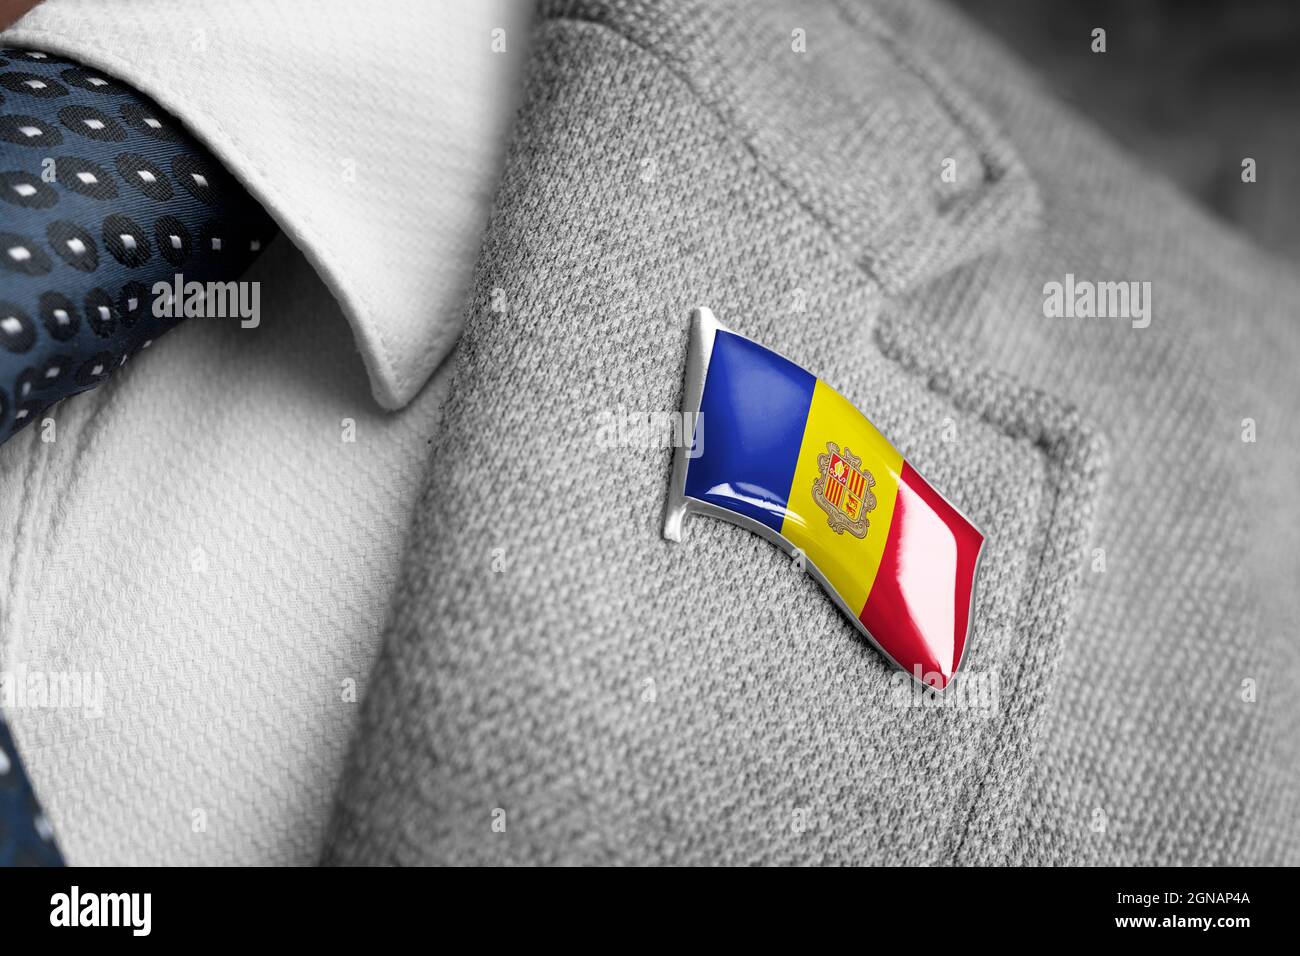 Metal badge with the flag of Andorra on a suit lapel Stock Photo